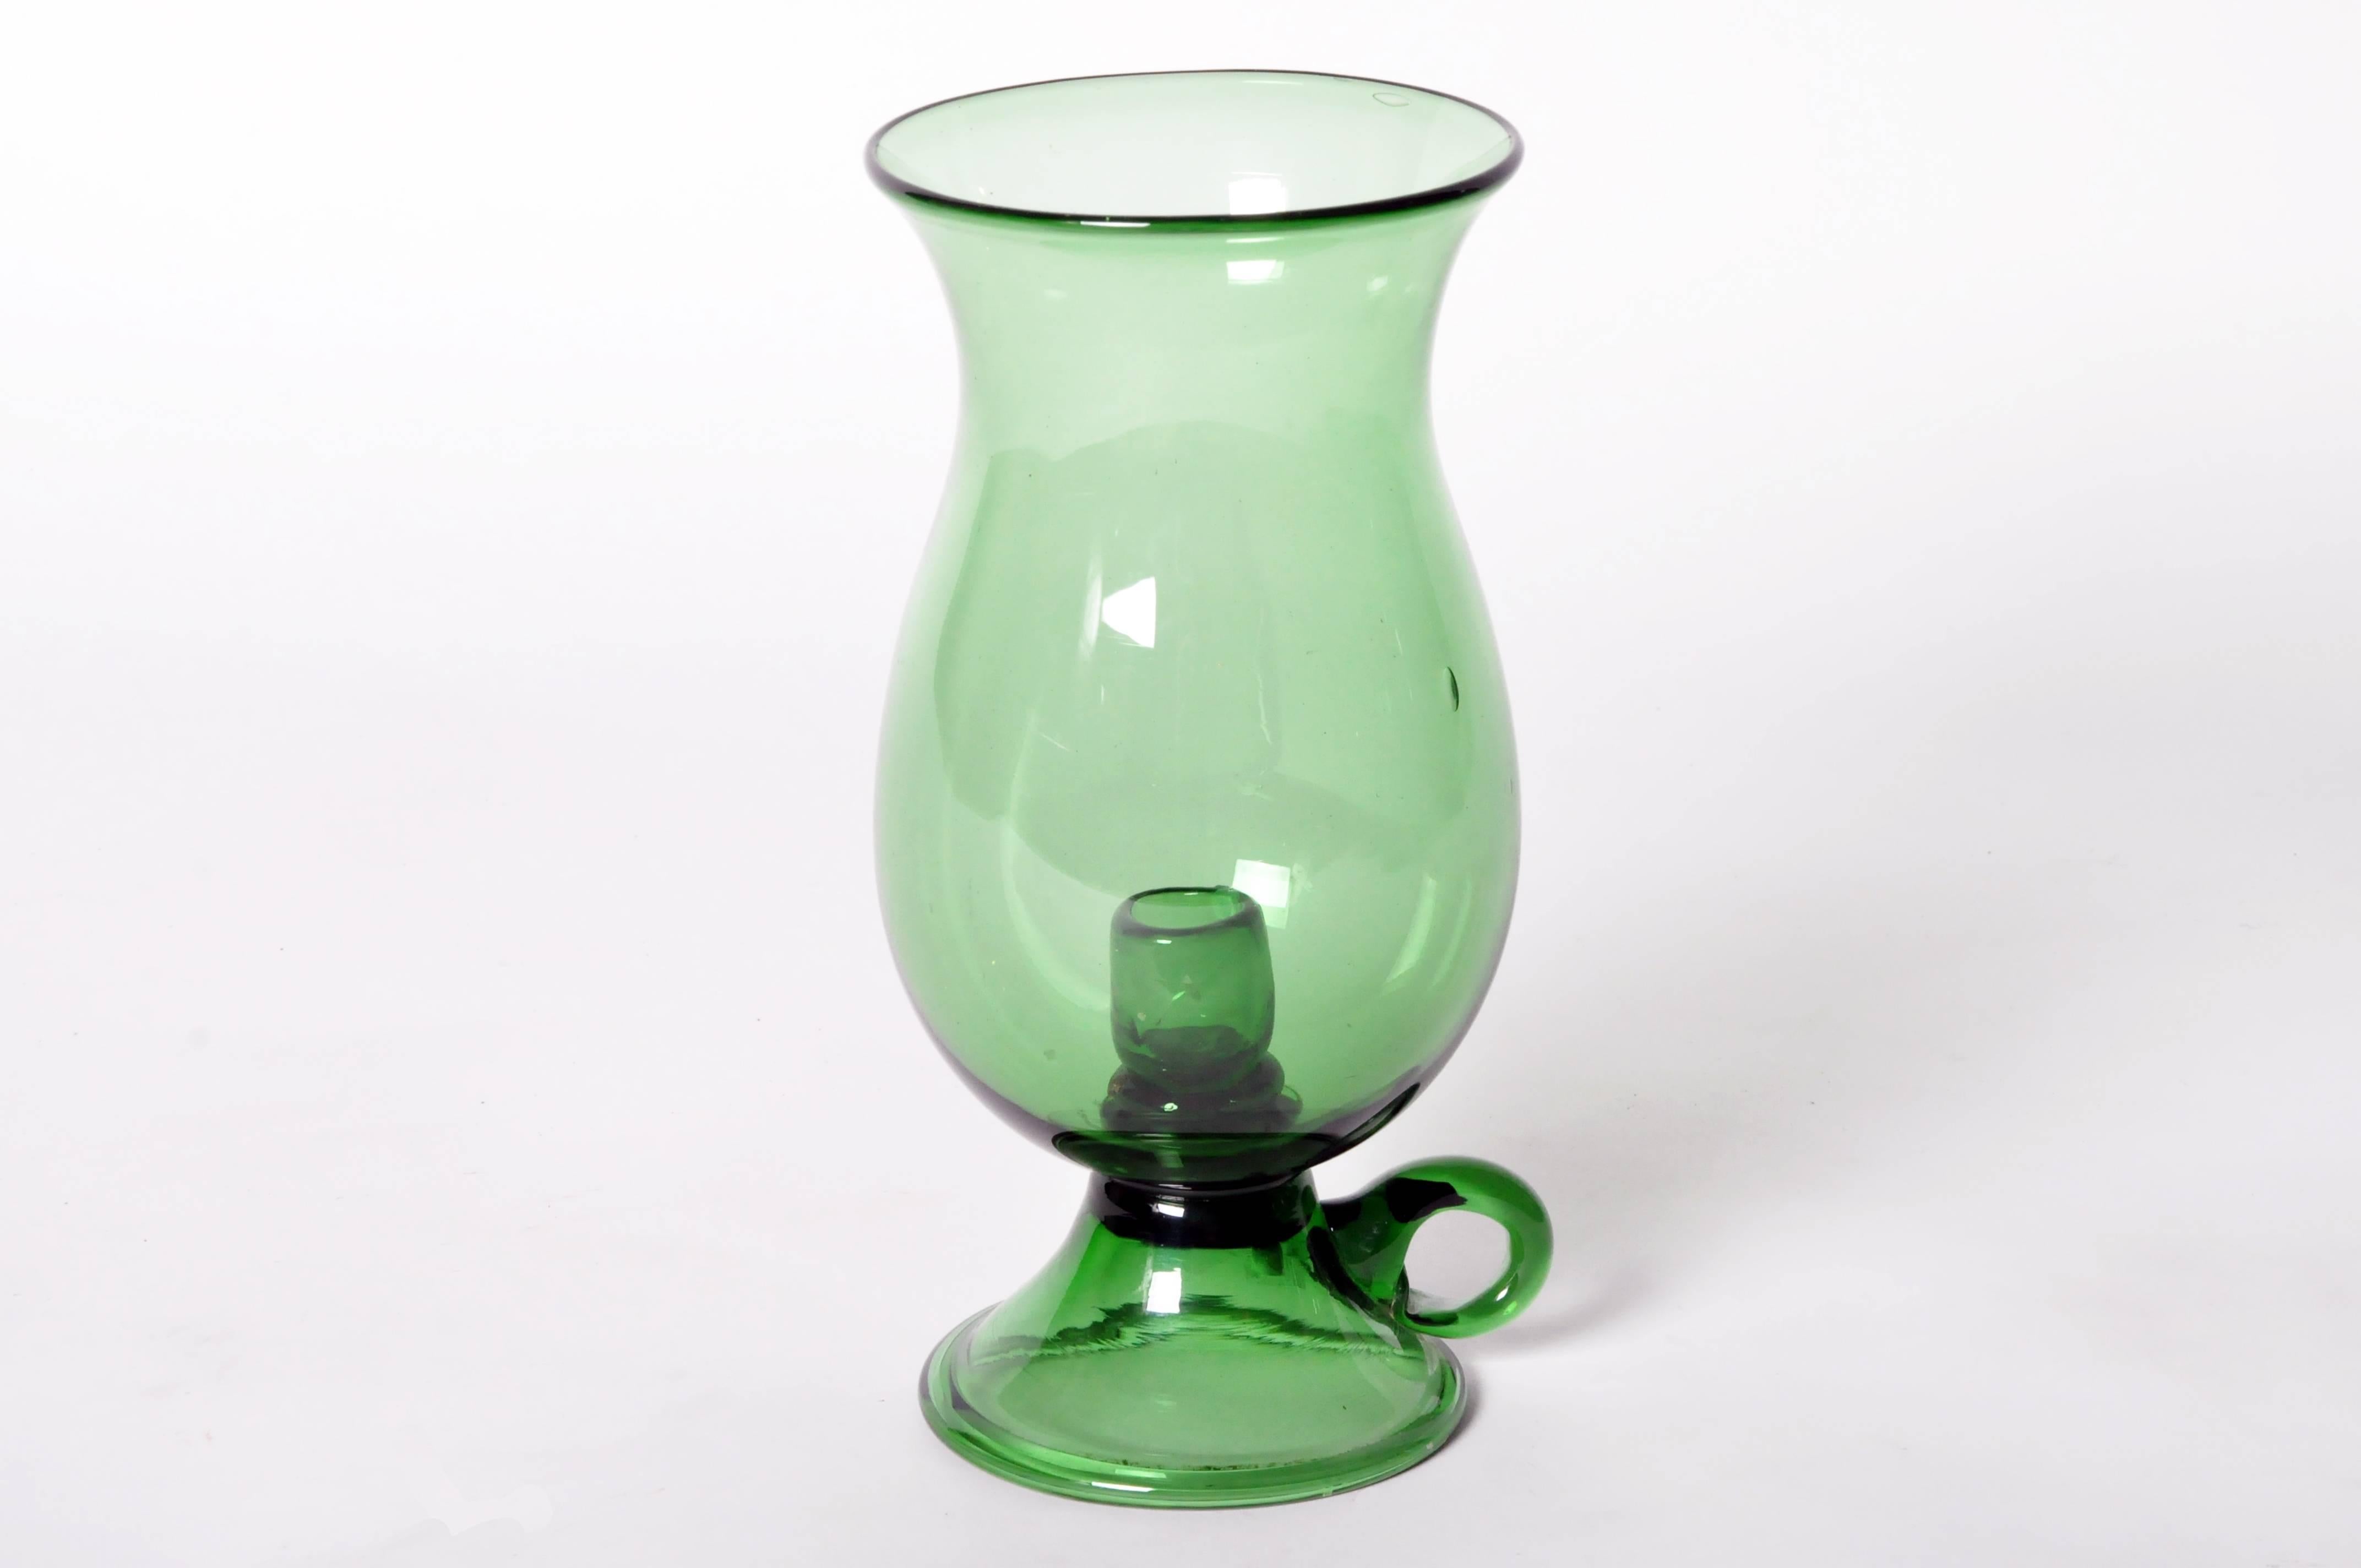 This emerald green taper candlestick holder makes a colorful addition to any mantel, side or entryway table.